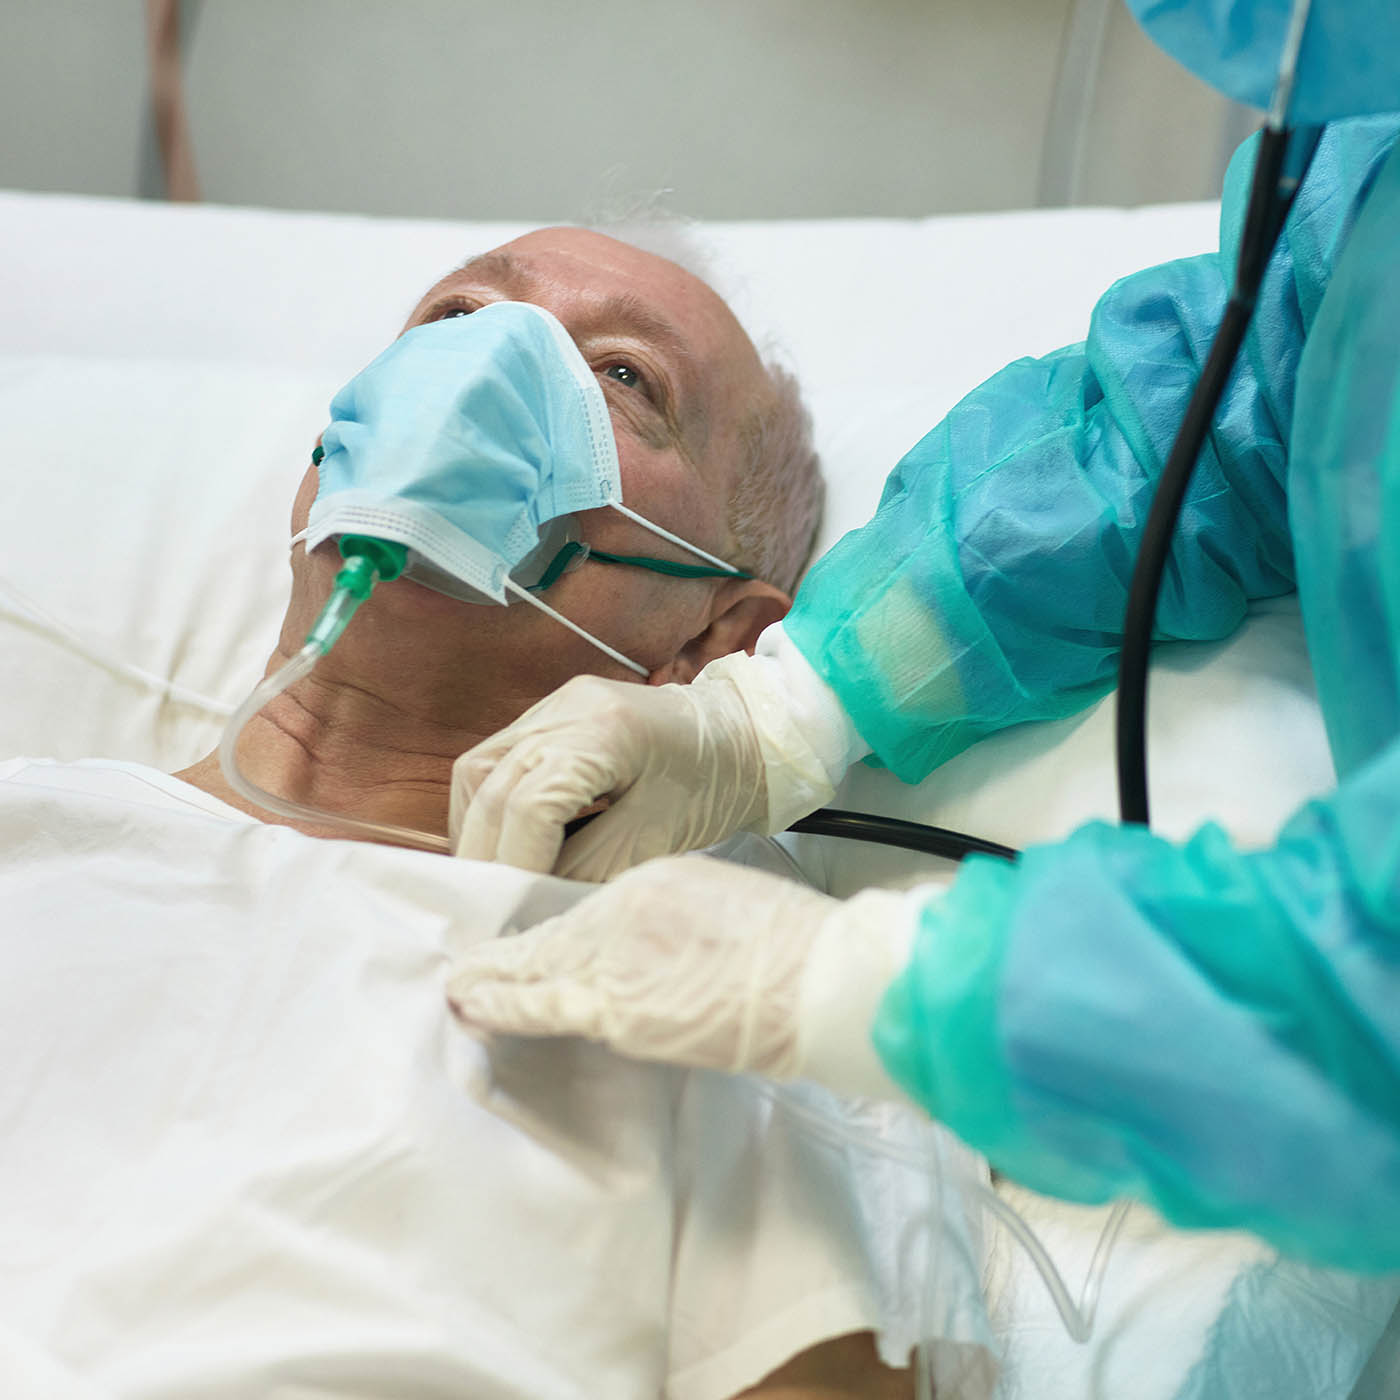 Man laying in hospital bed receiving supplemental oxygen